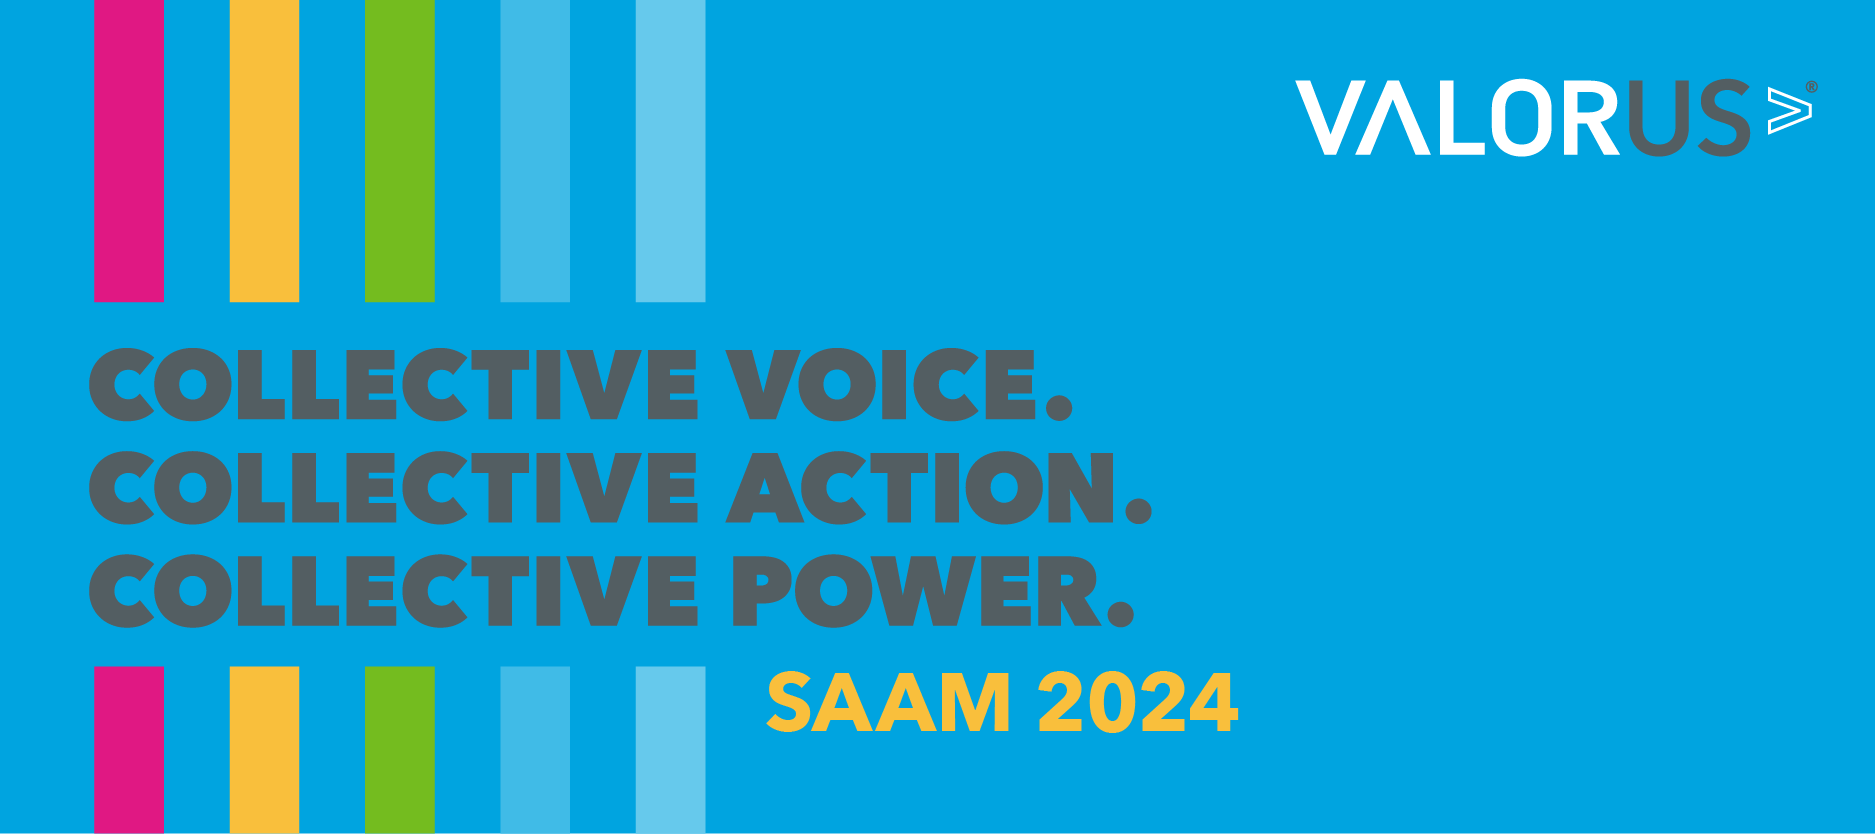 Dark blue background with vertical pink, yellow, green, teal, and light blue stripes. Text on the screen says, "Collective voice. Collective action. Collective power. SAAM 2024." VALOR logo.